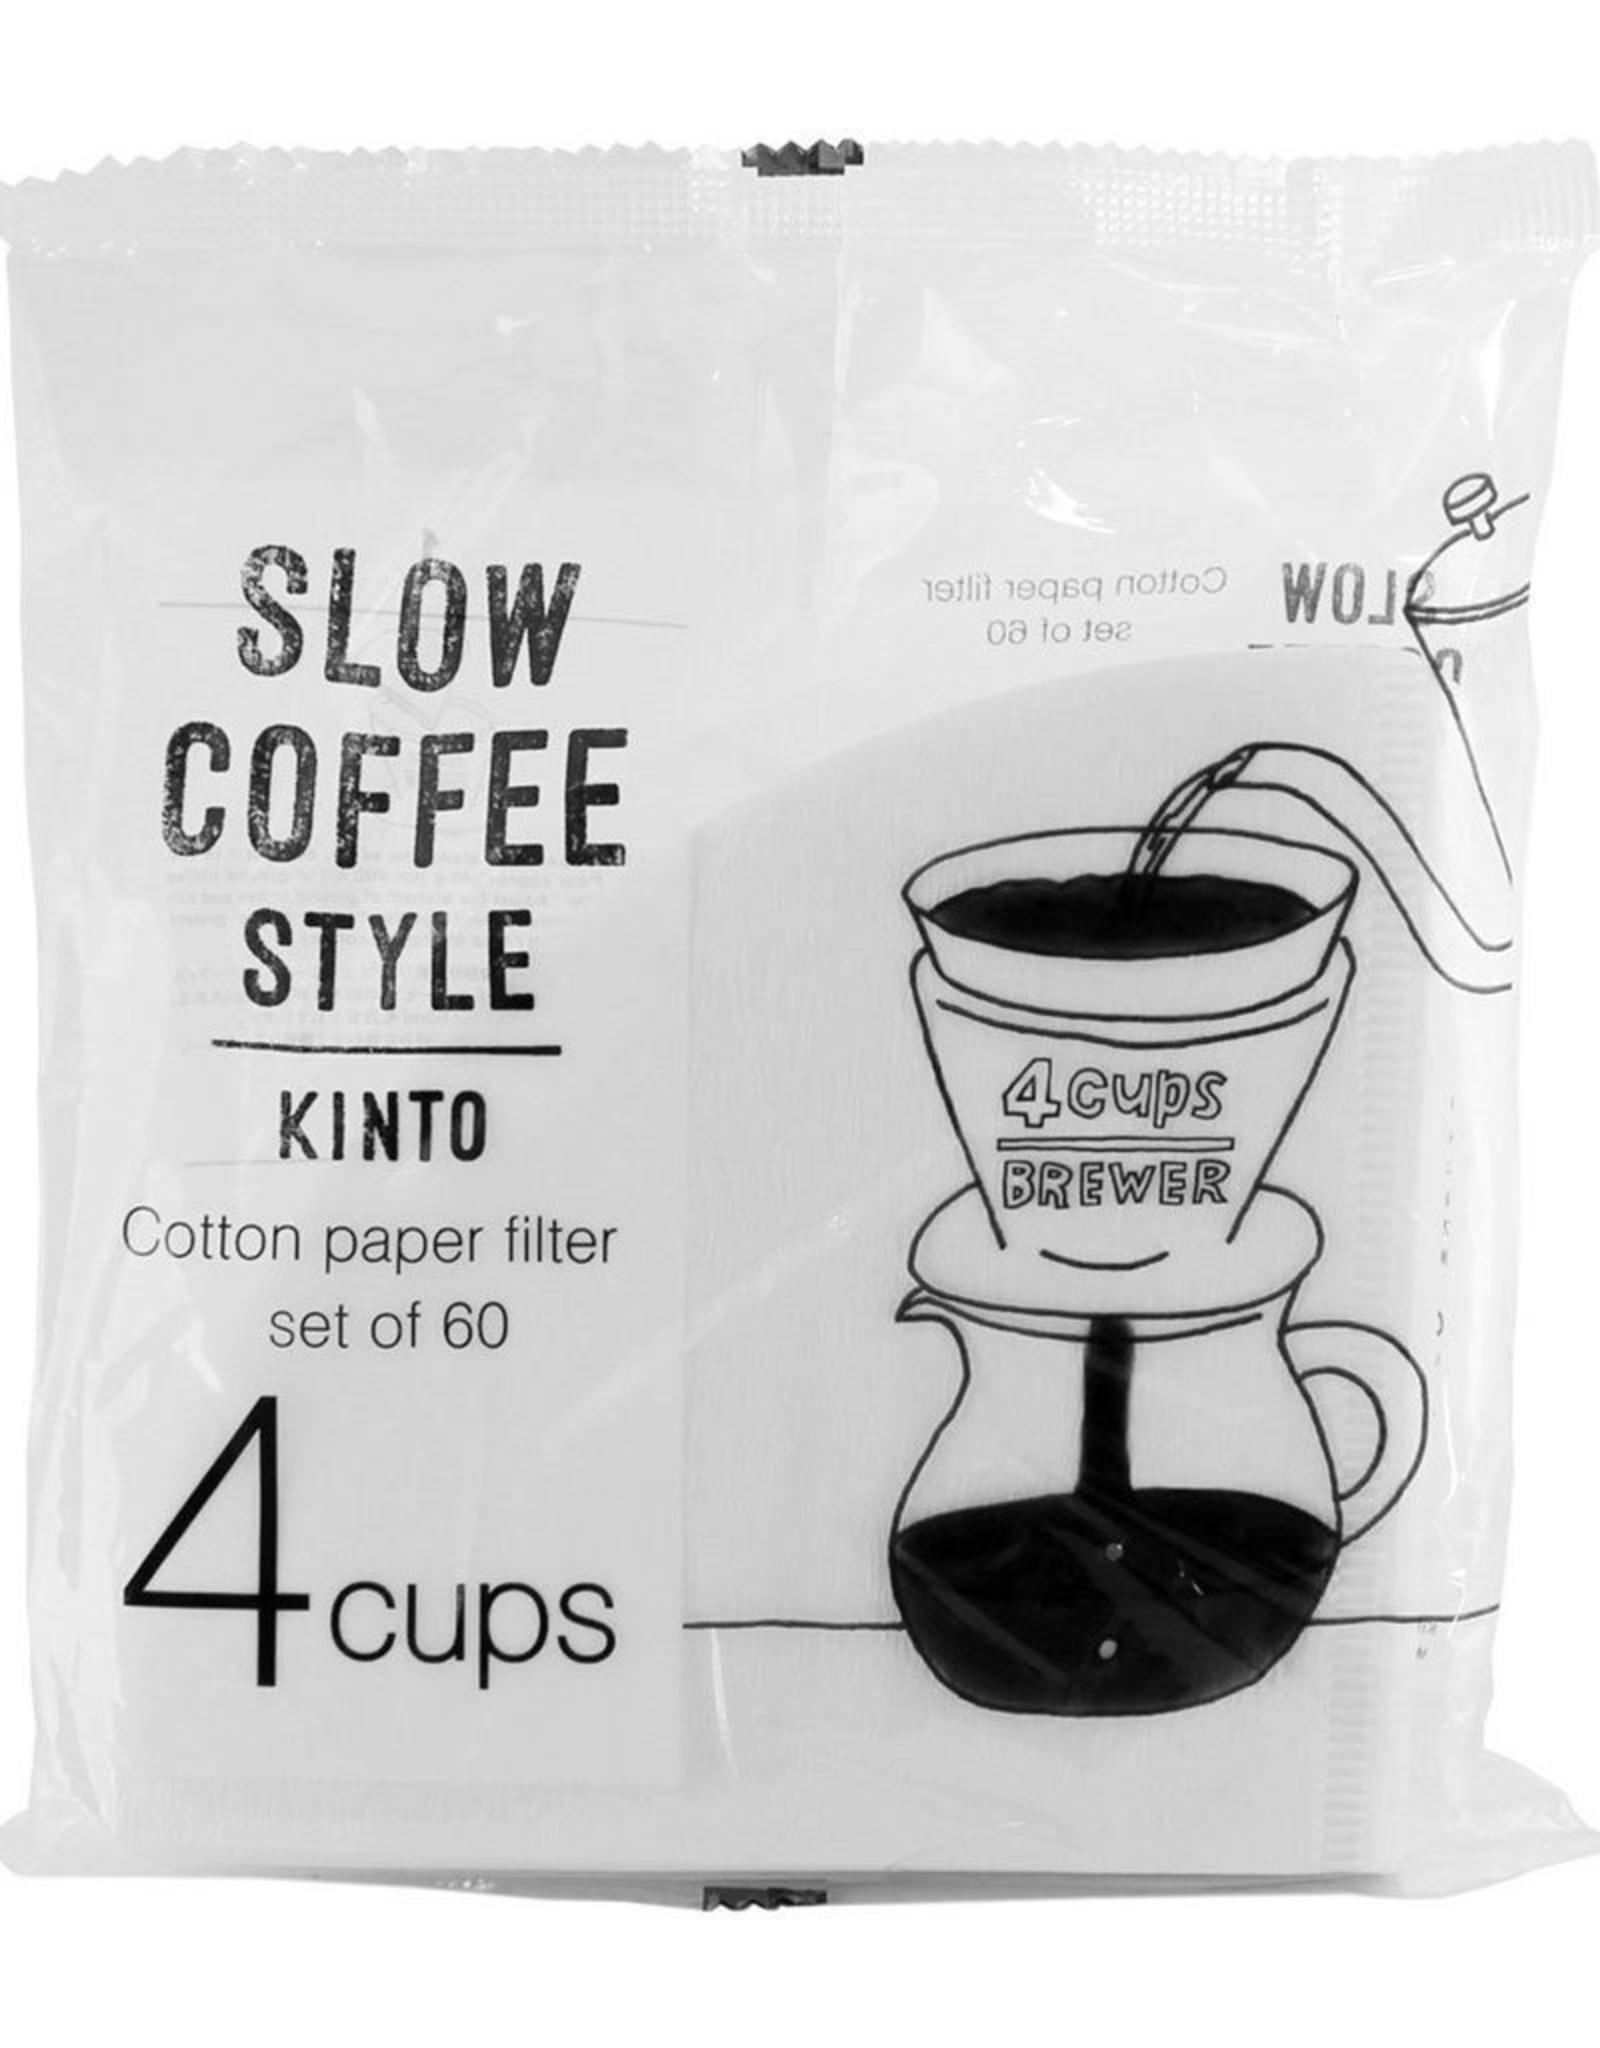 Kinto - Slow Coffee Style - Cotton Paper Filter - 4 Cup